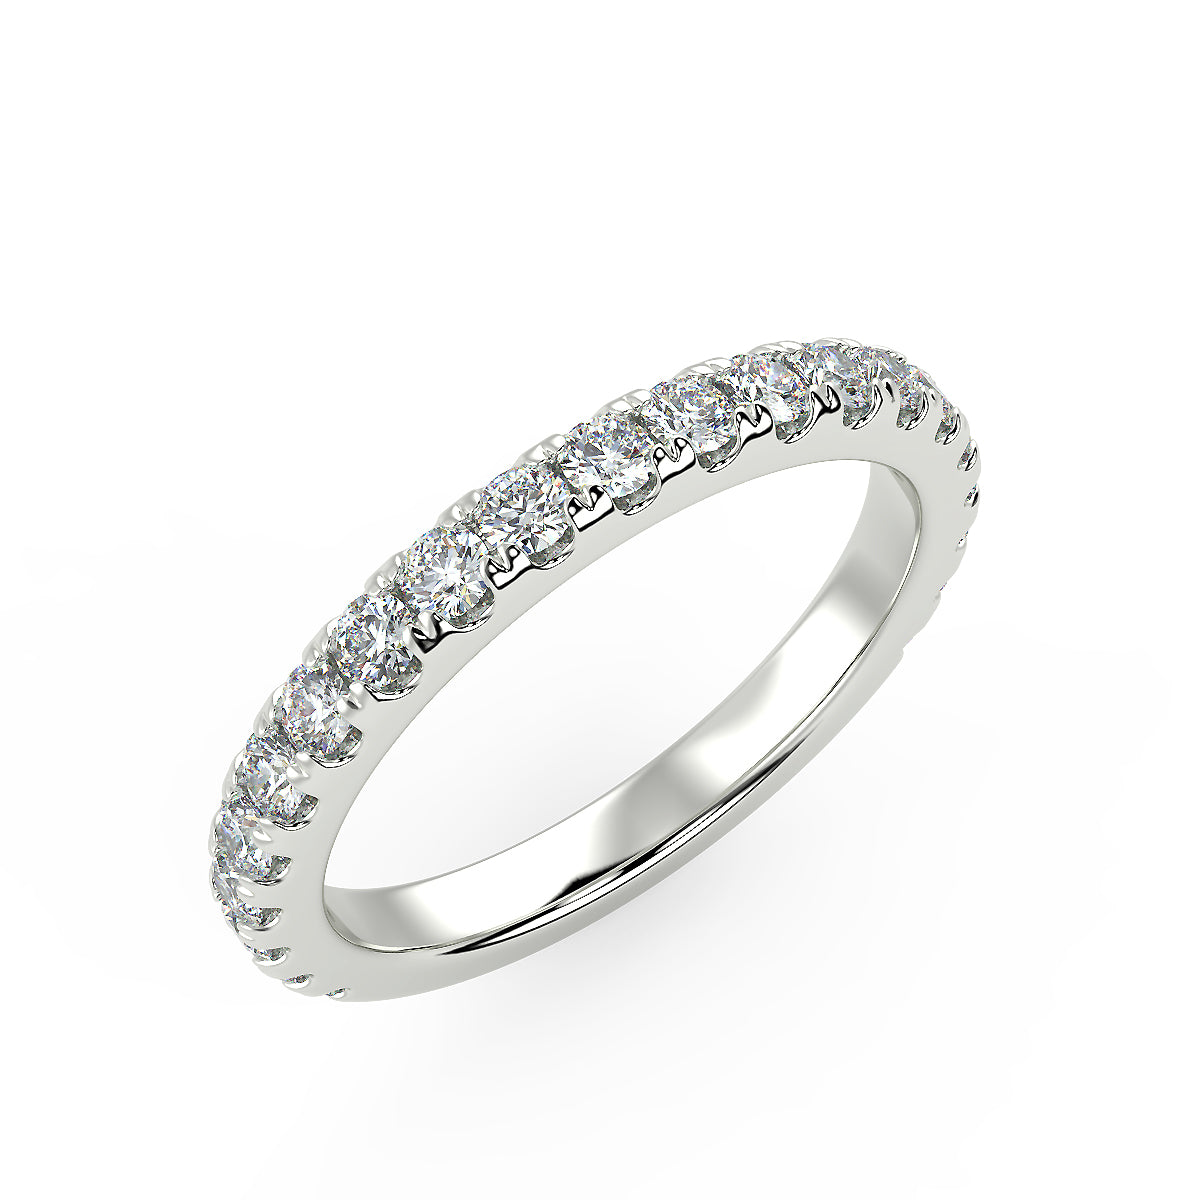 River of Light Band in White Gold (1.05 Ct. Tw.)